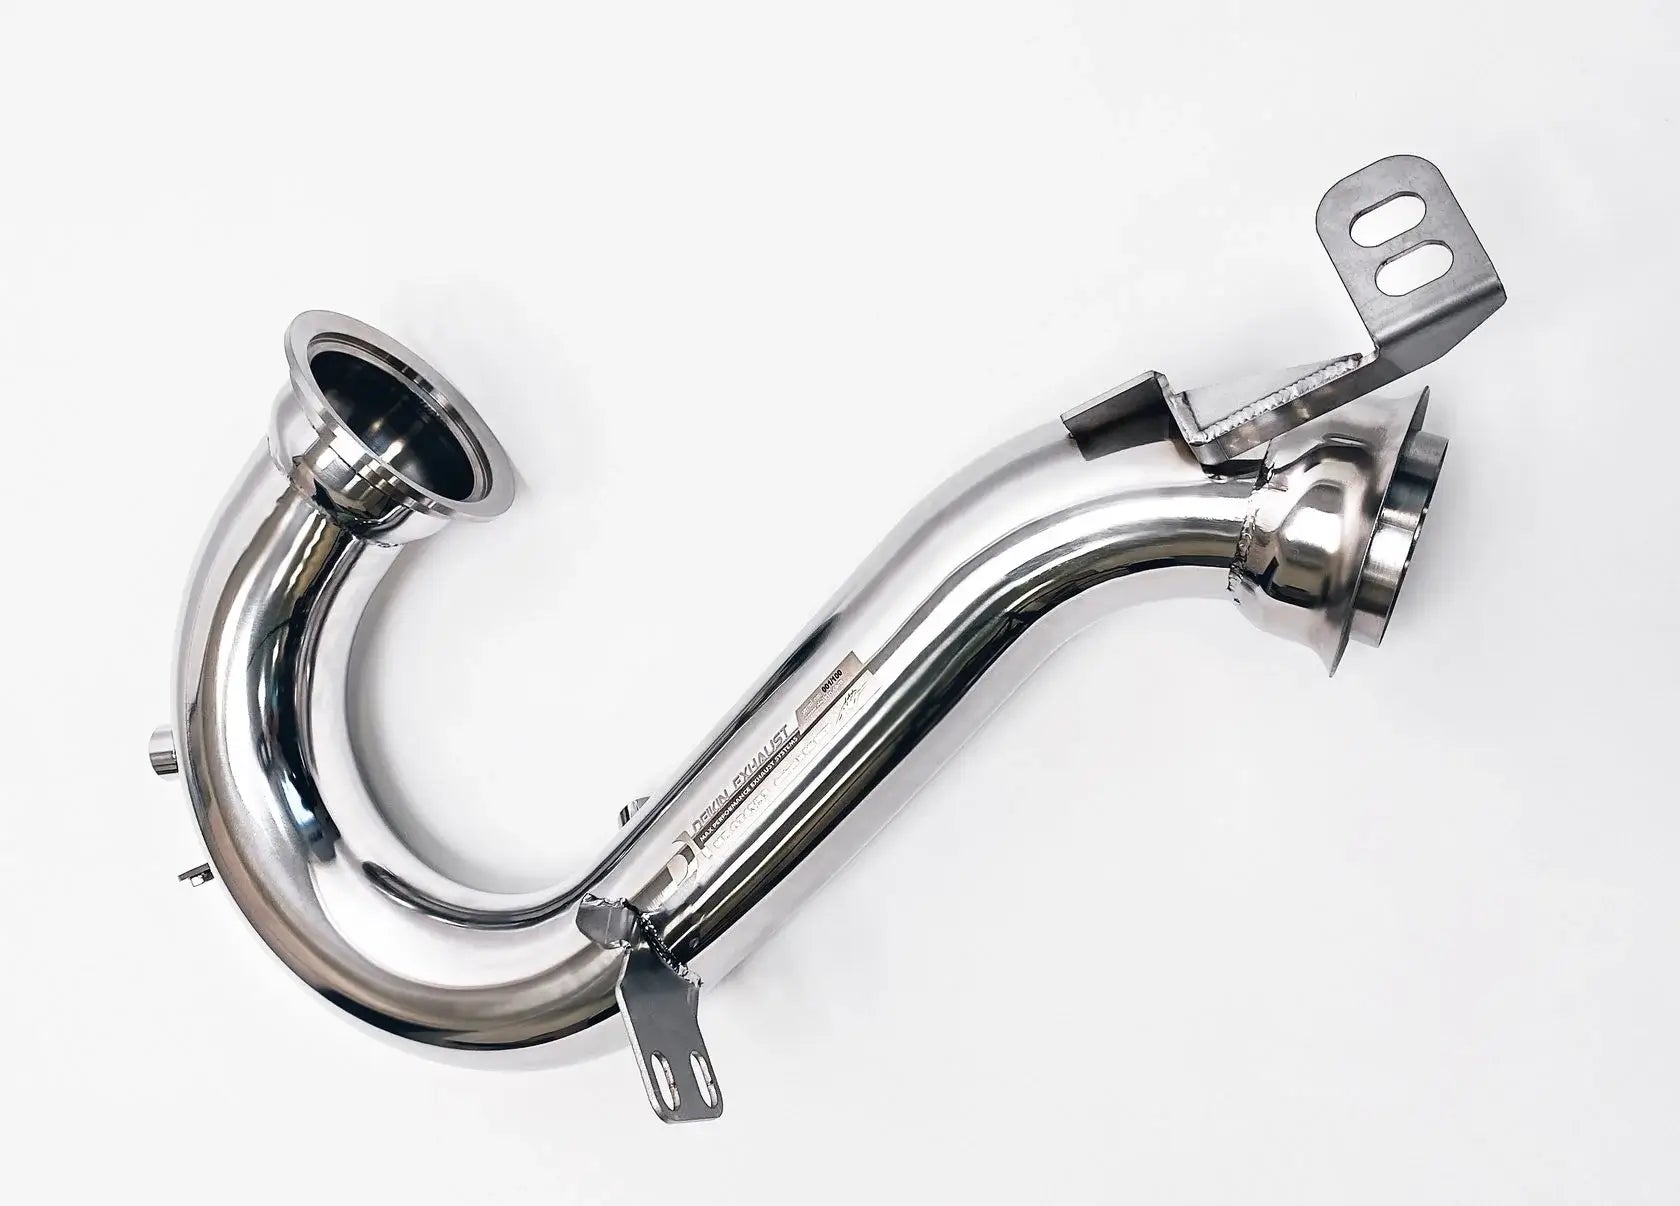 DEIKIN 10-MB.CLS53.C257-DP Downpipe for Mercedes CLS53 (C257) without HeatShield Photo-1 